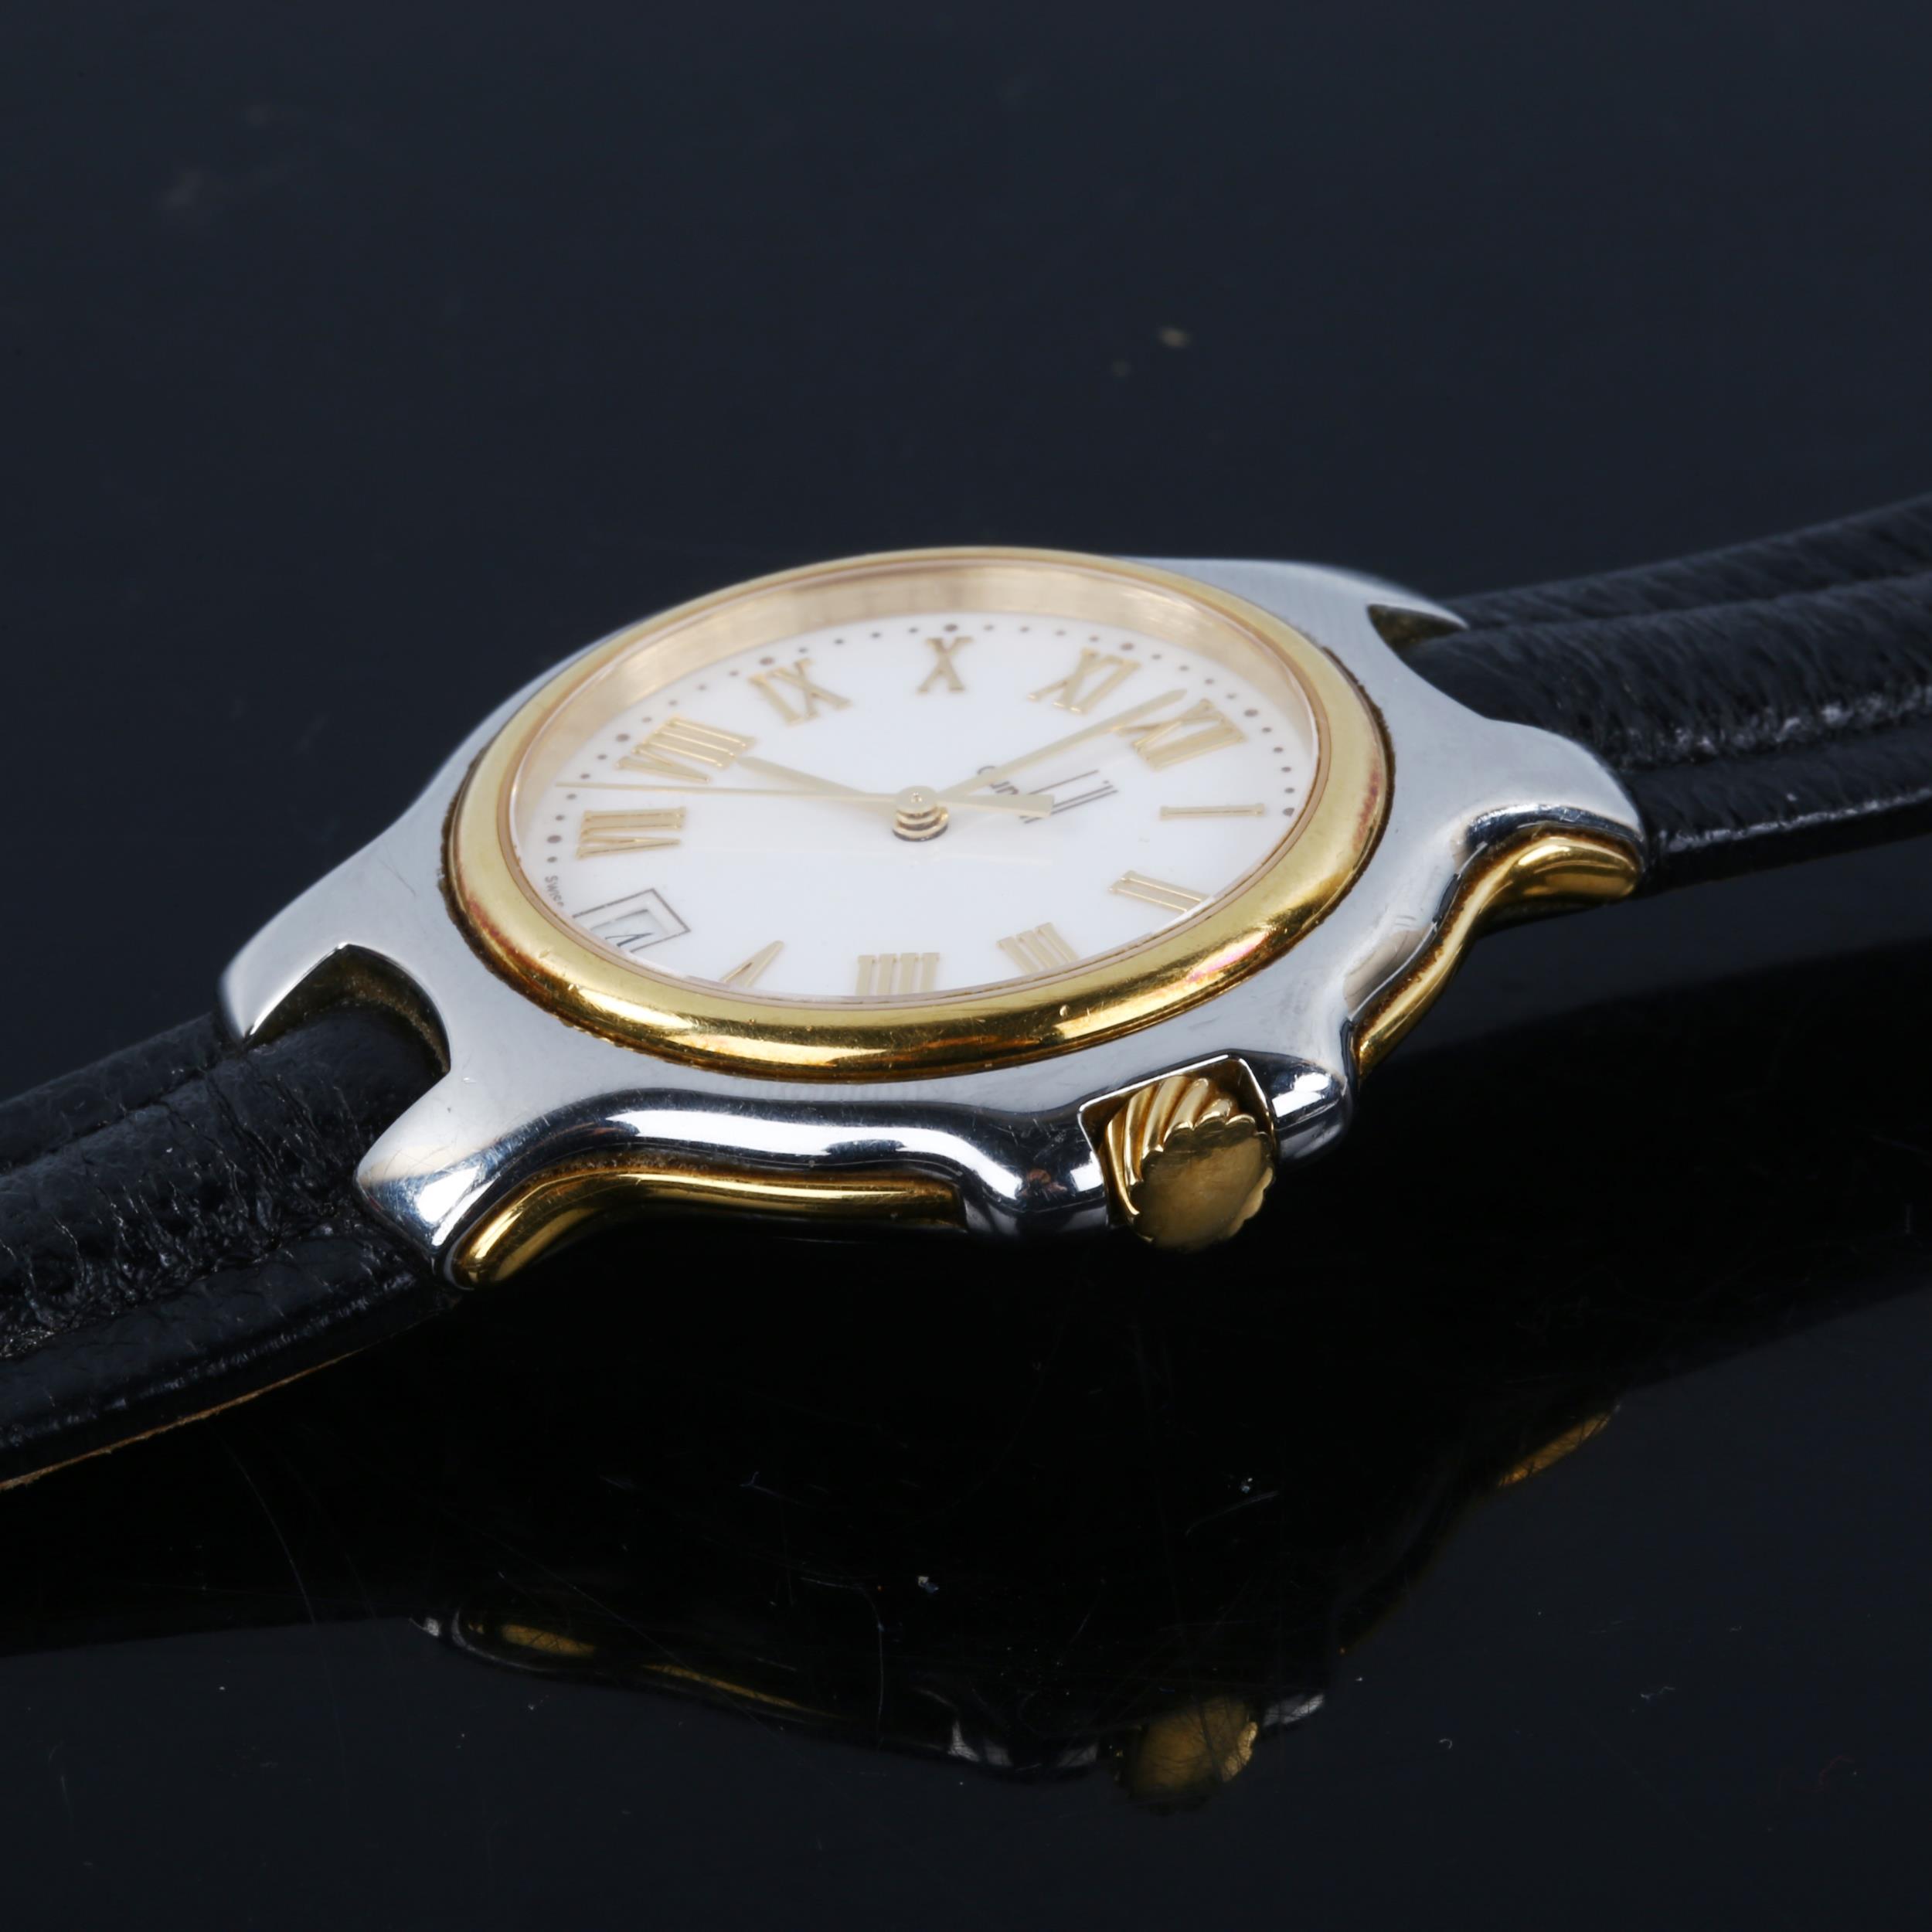 DUNHILL - a gold plated stainless steel Londinium quartz wristwatch, circa 1998, white dial with - Image 3 of 5